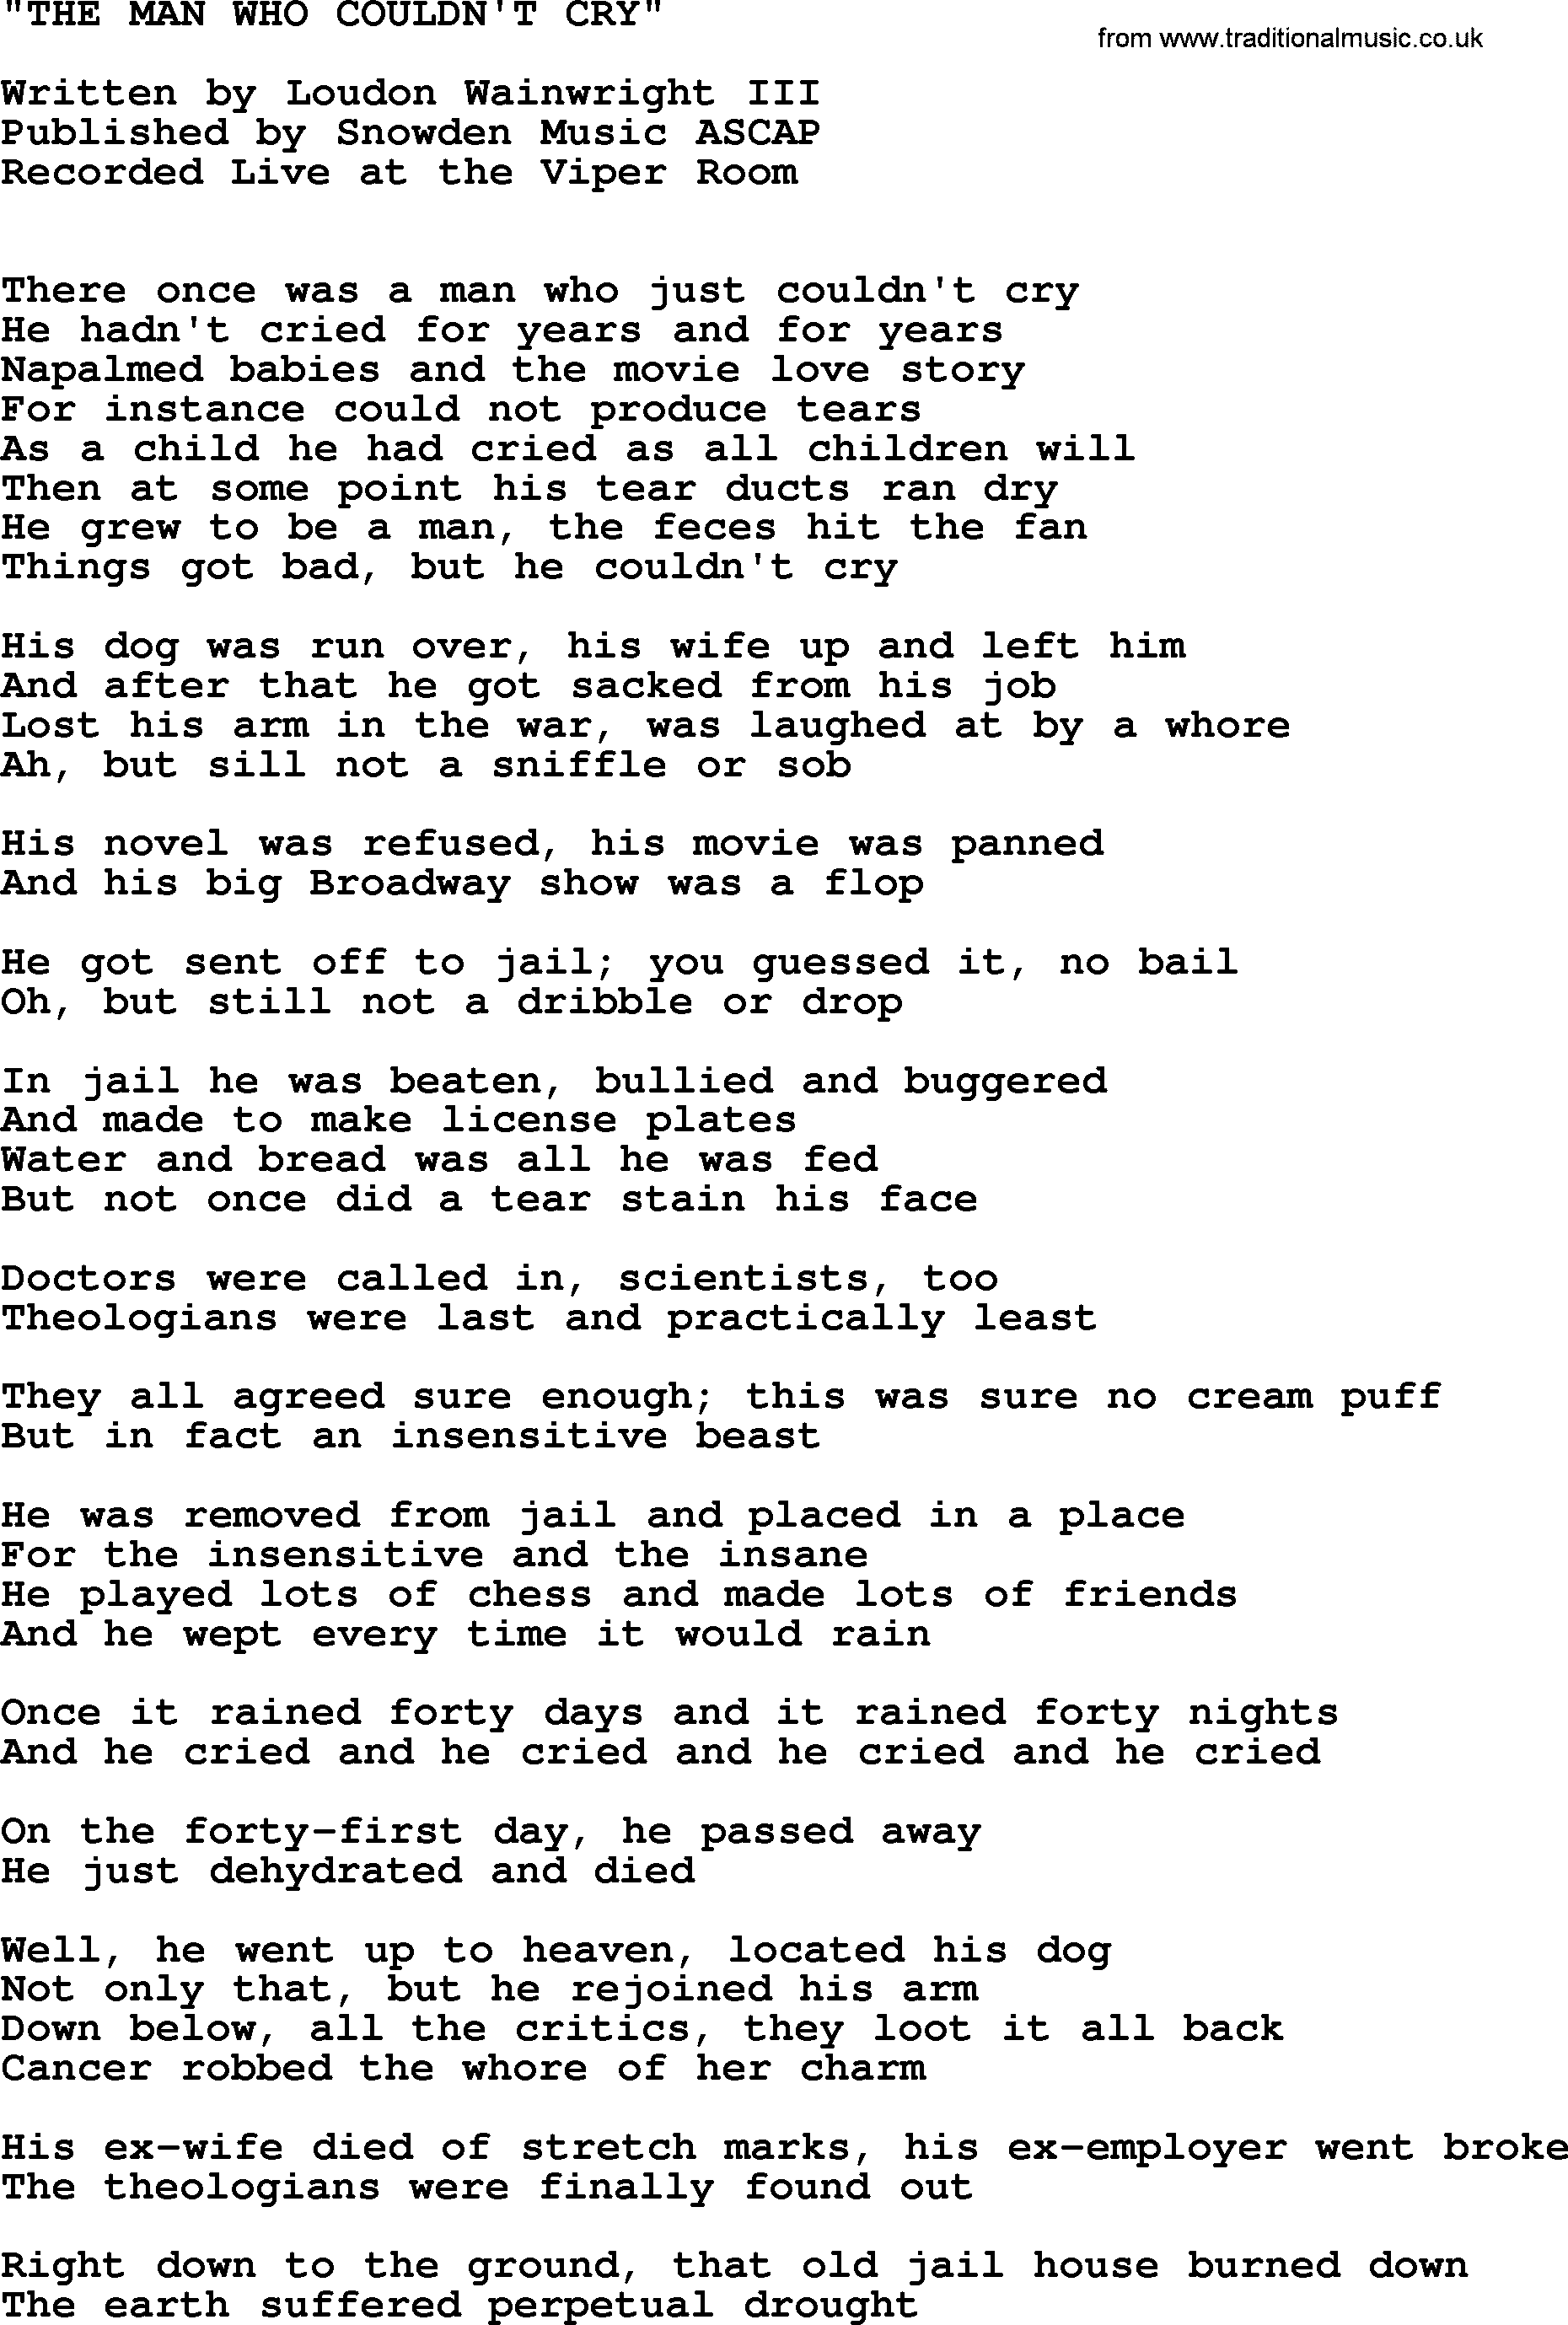 Johnny Cash song The Man Who Couldn't Cry_.txt lyrics